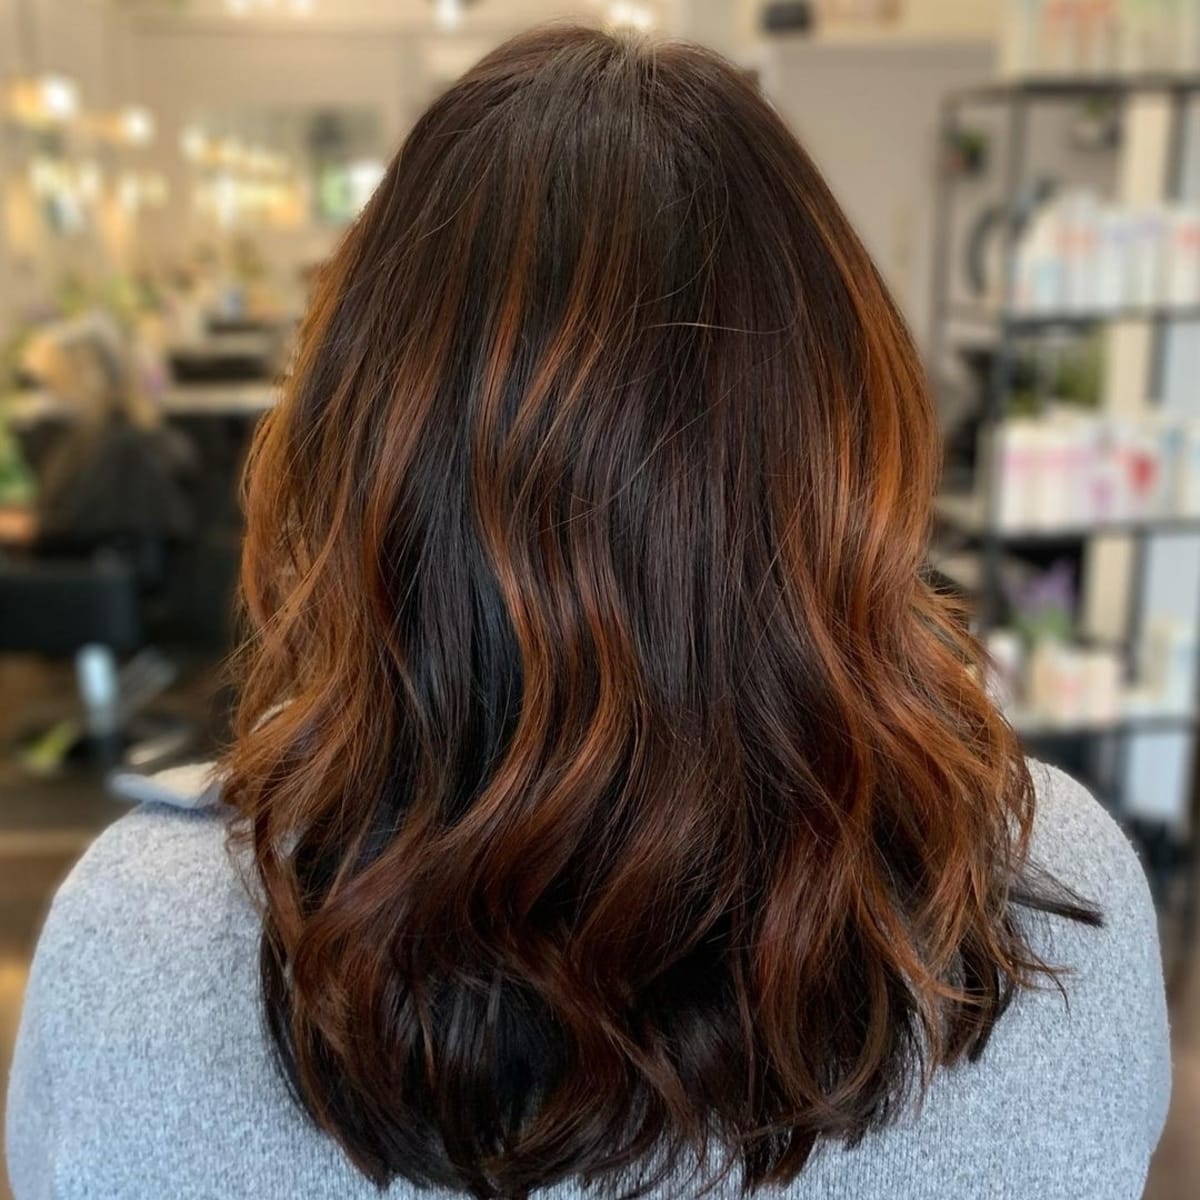 Very dark hair with copper highlights